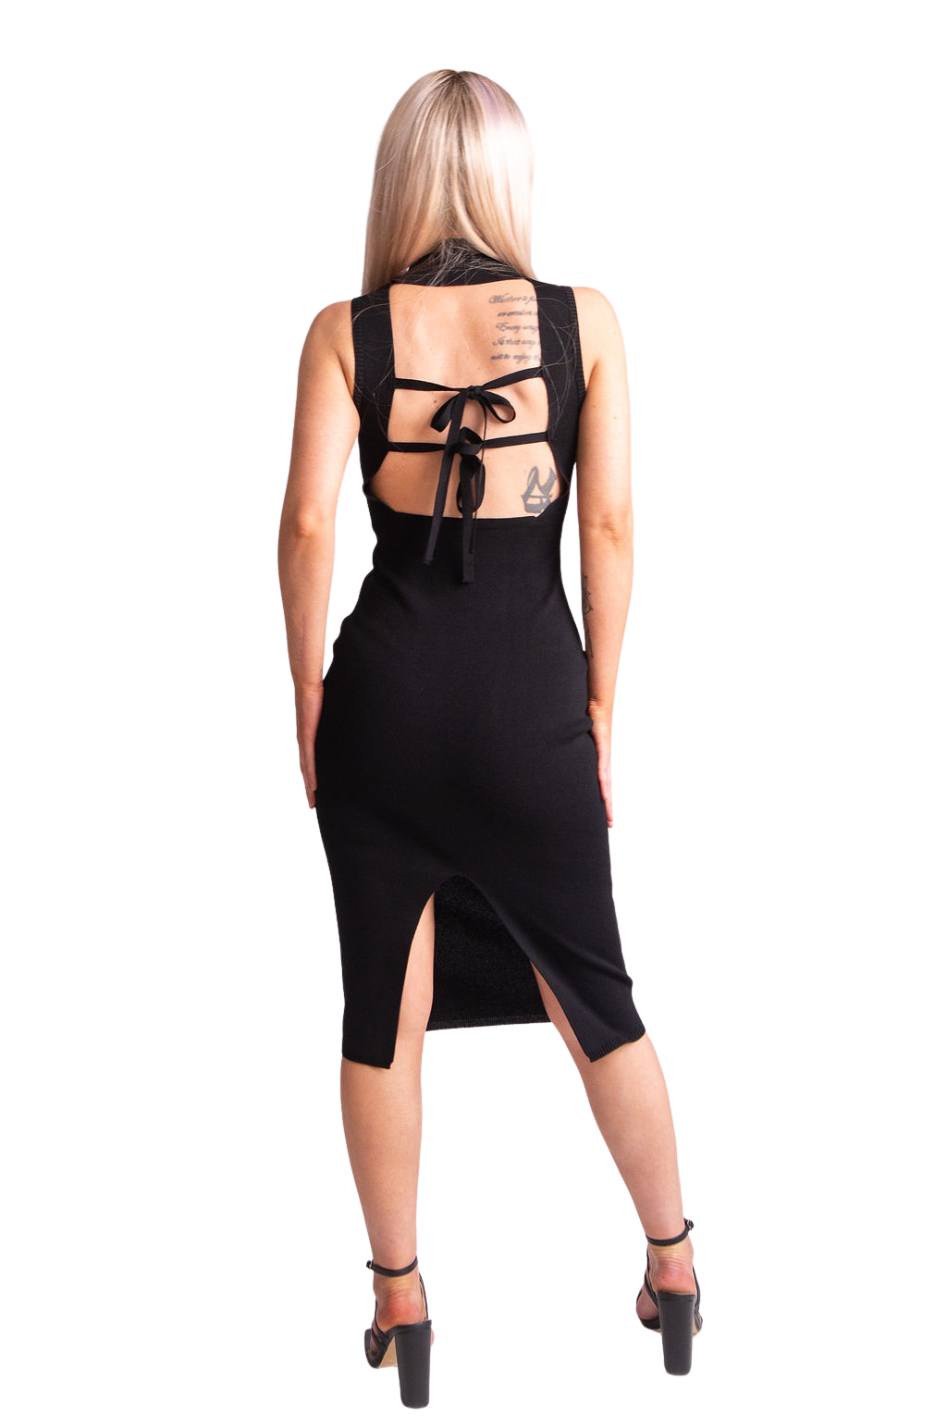 Backless Belle: The Sleeveless Little Black Midi Dress - Expressive Collective CO.